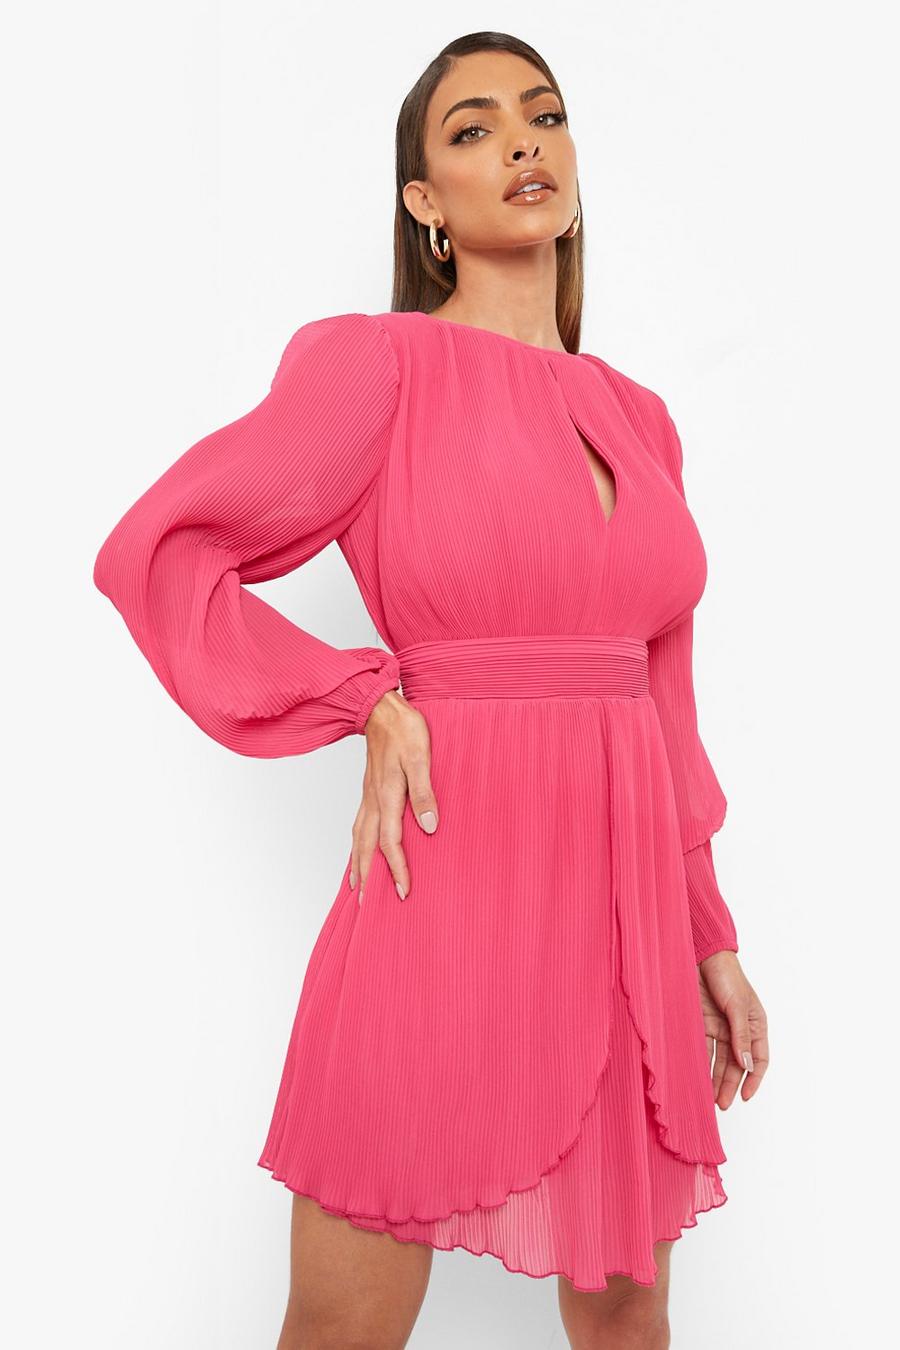 Hot pink Pleated Cut Out Skater Dress